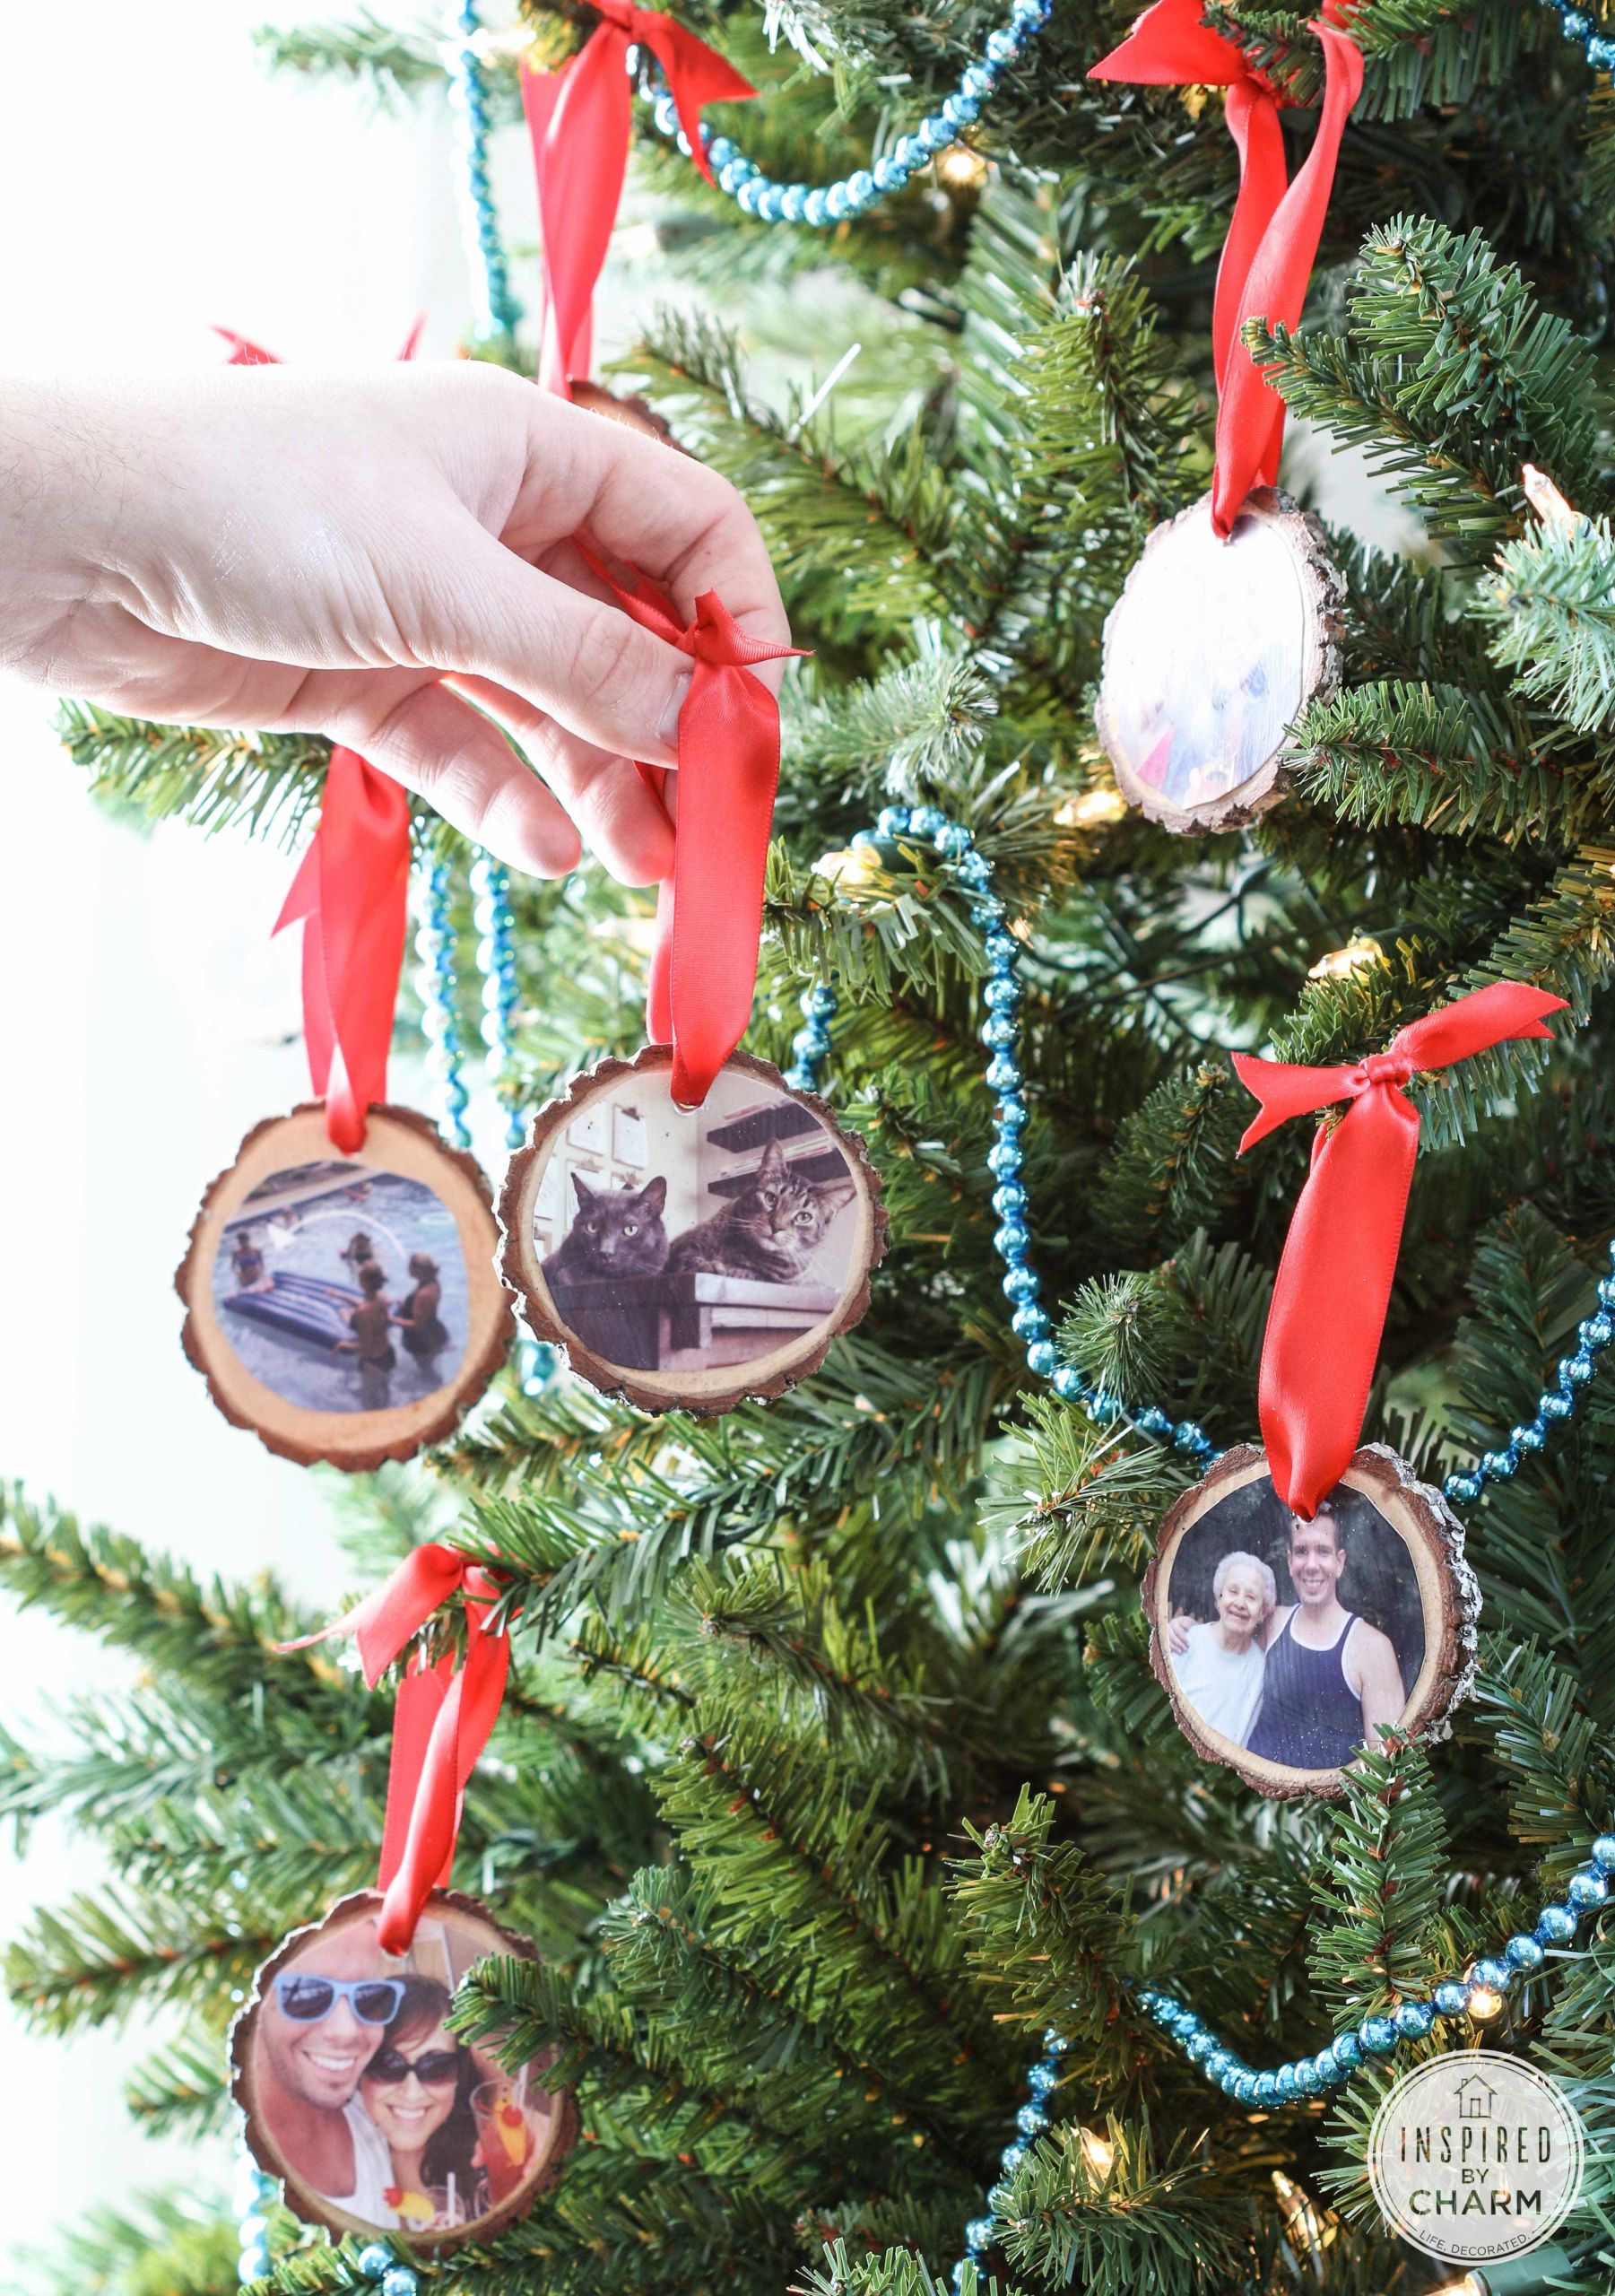 DIY Picture Christmas Ornaments
 DIY Wood Slice Ornaments